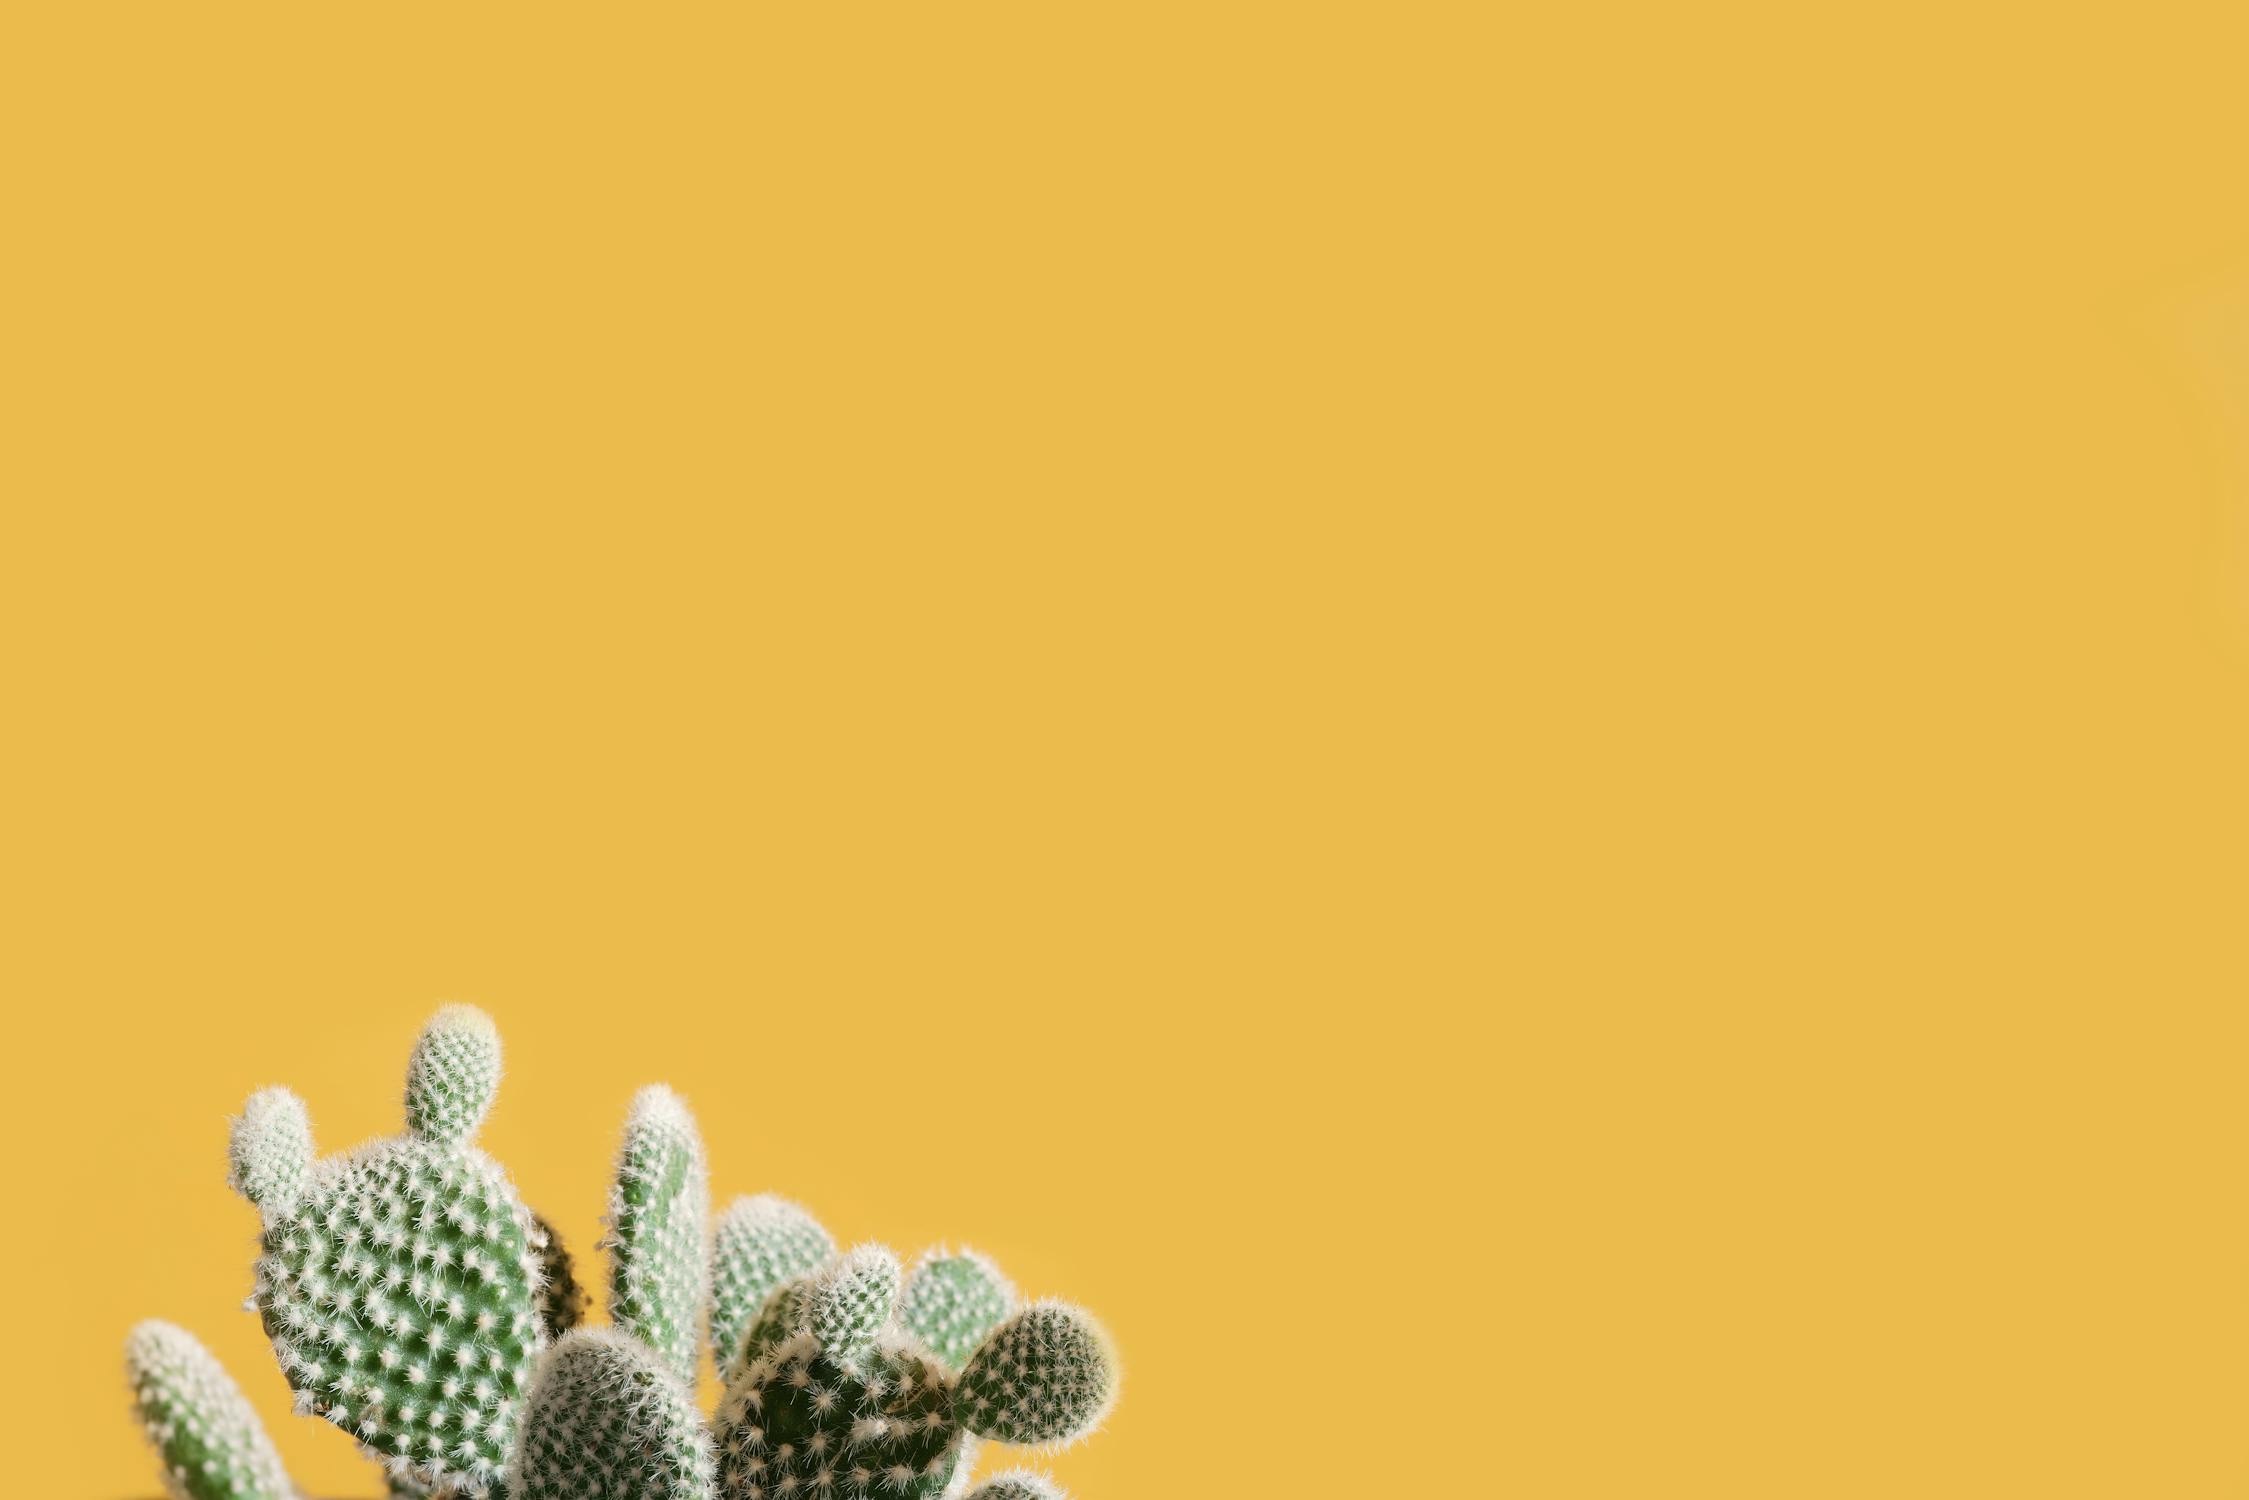 Part of a cactus in yellow background